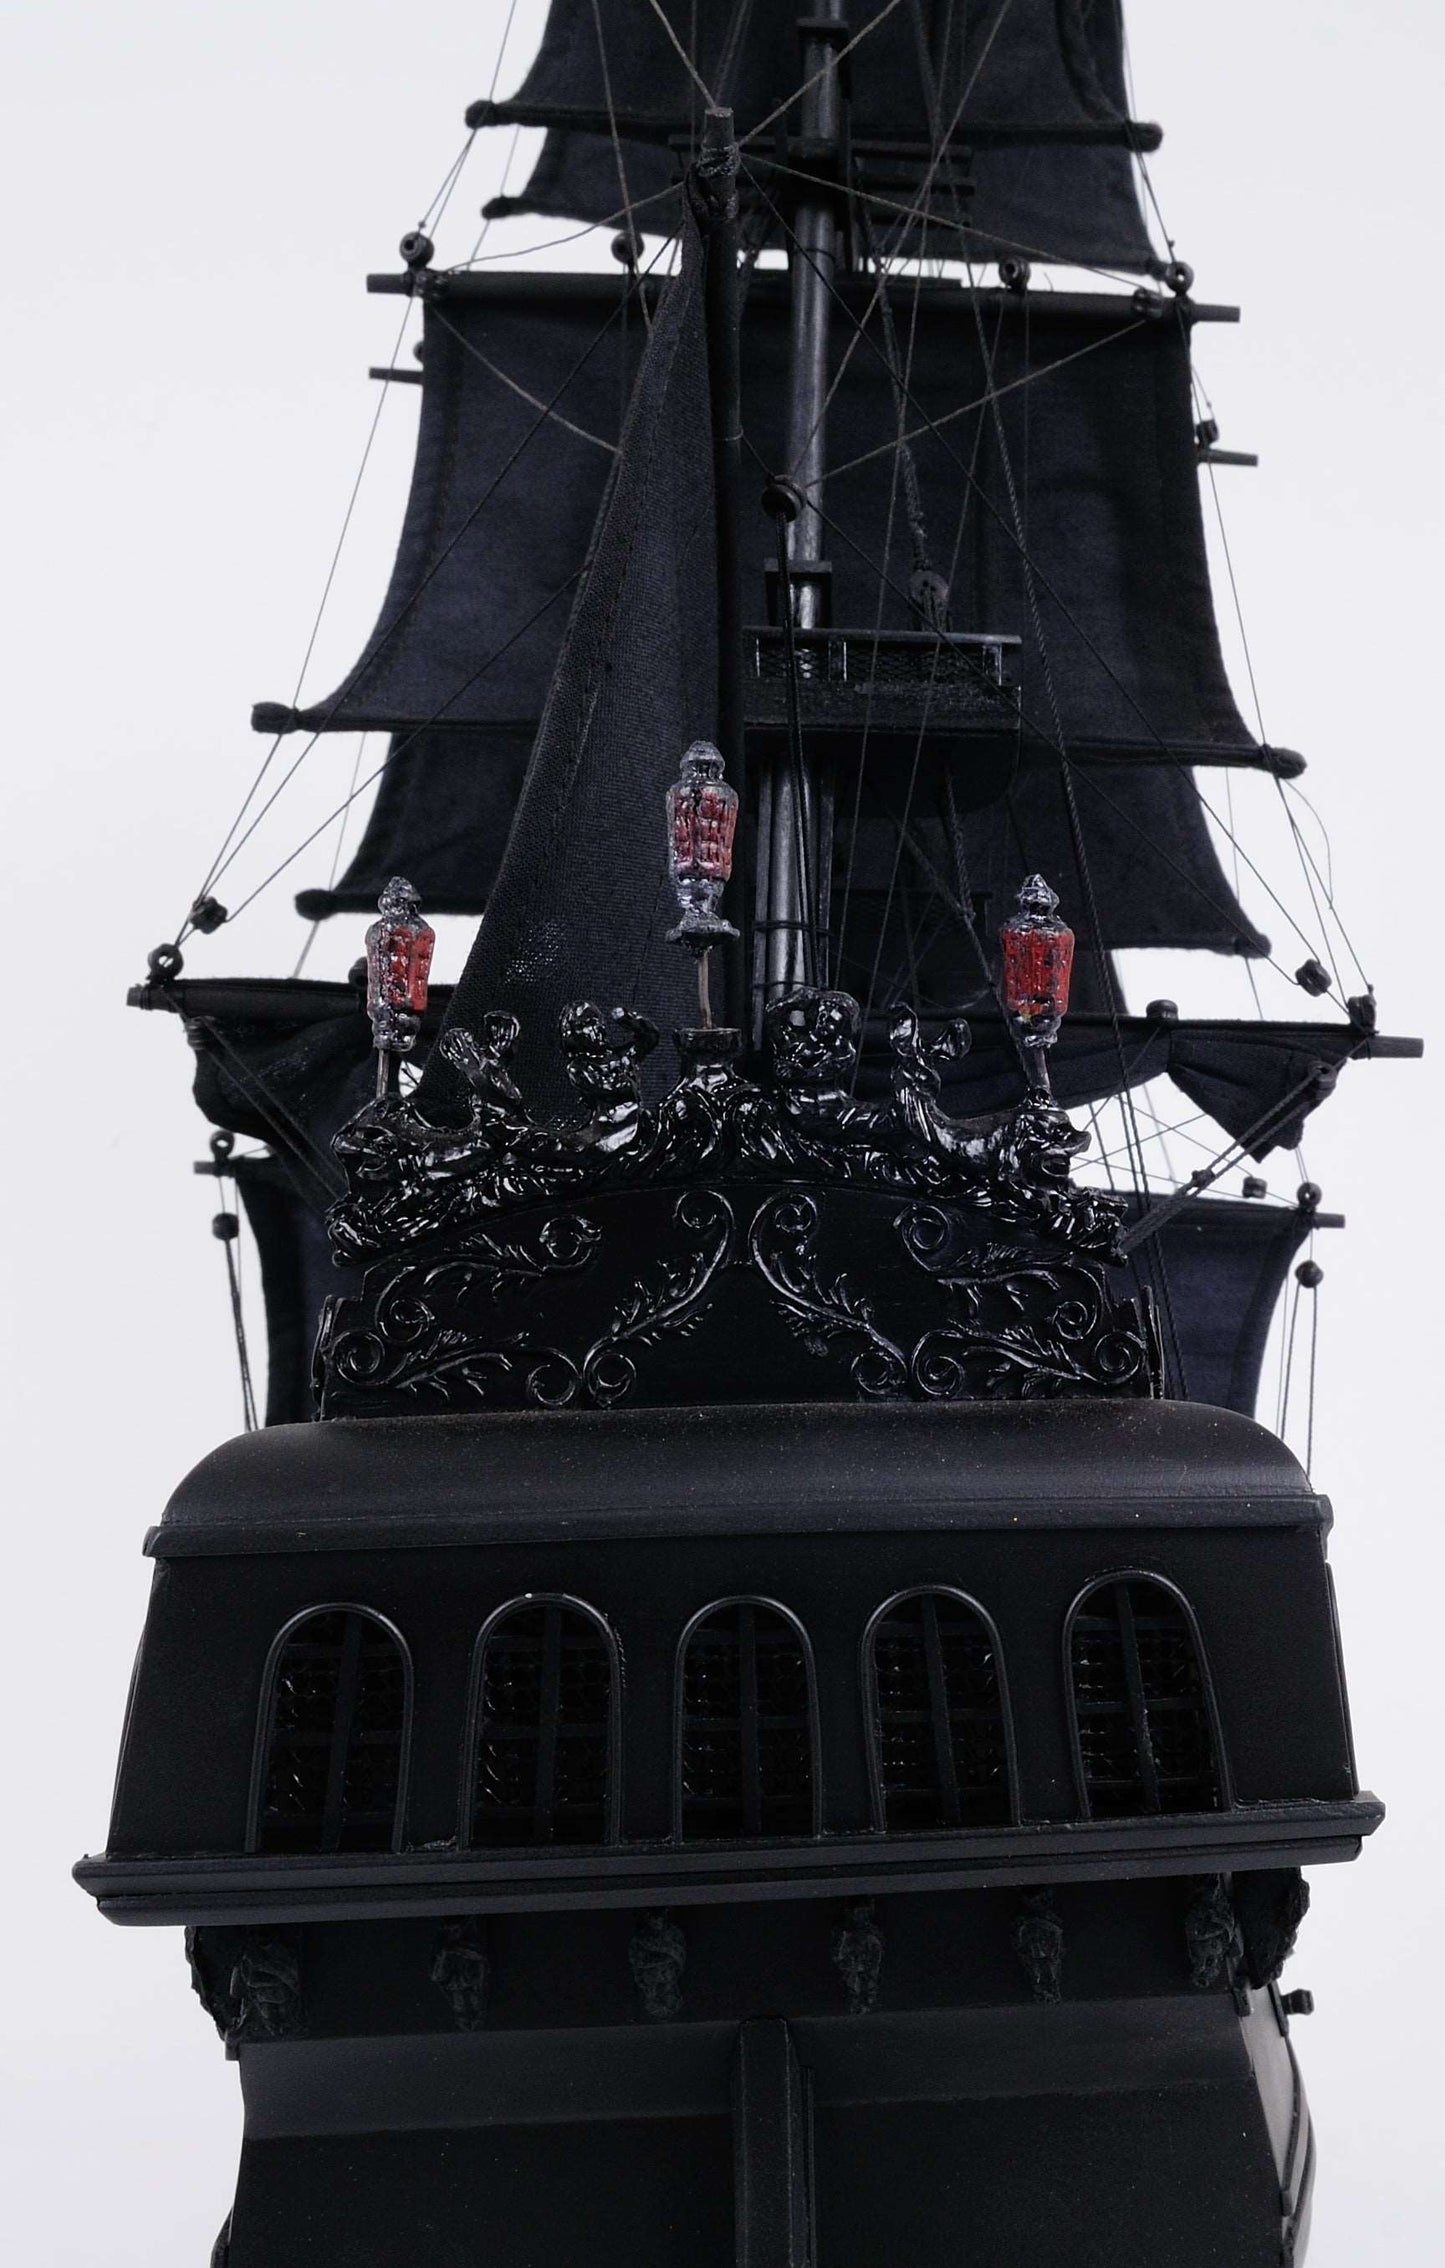 ALDO Hobbies & Creative Arts> Collectibles> Scale Model L: 40 W: 13.75 H: 39.25 Inches / NEW / Wood Black Pearl Pirates of The Caribbean Medium Tall Ship Wood Model Sailboat With Table Top Display Case Assembled